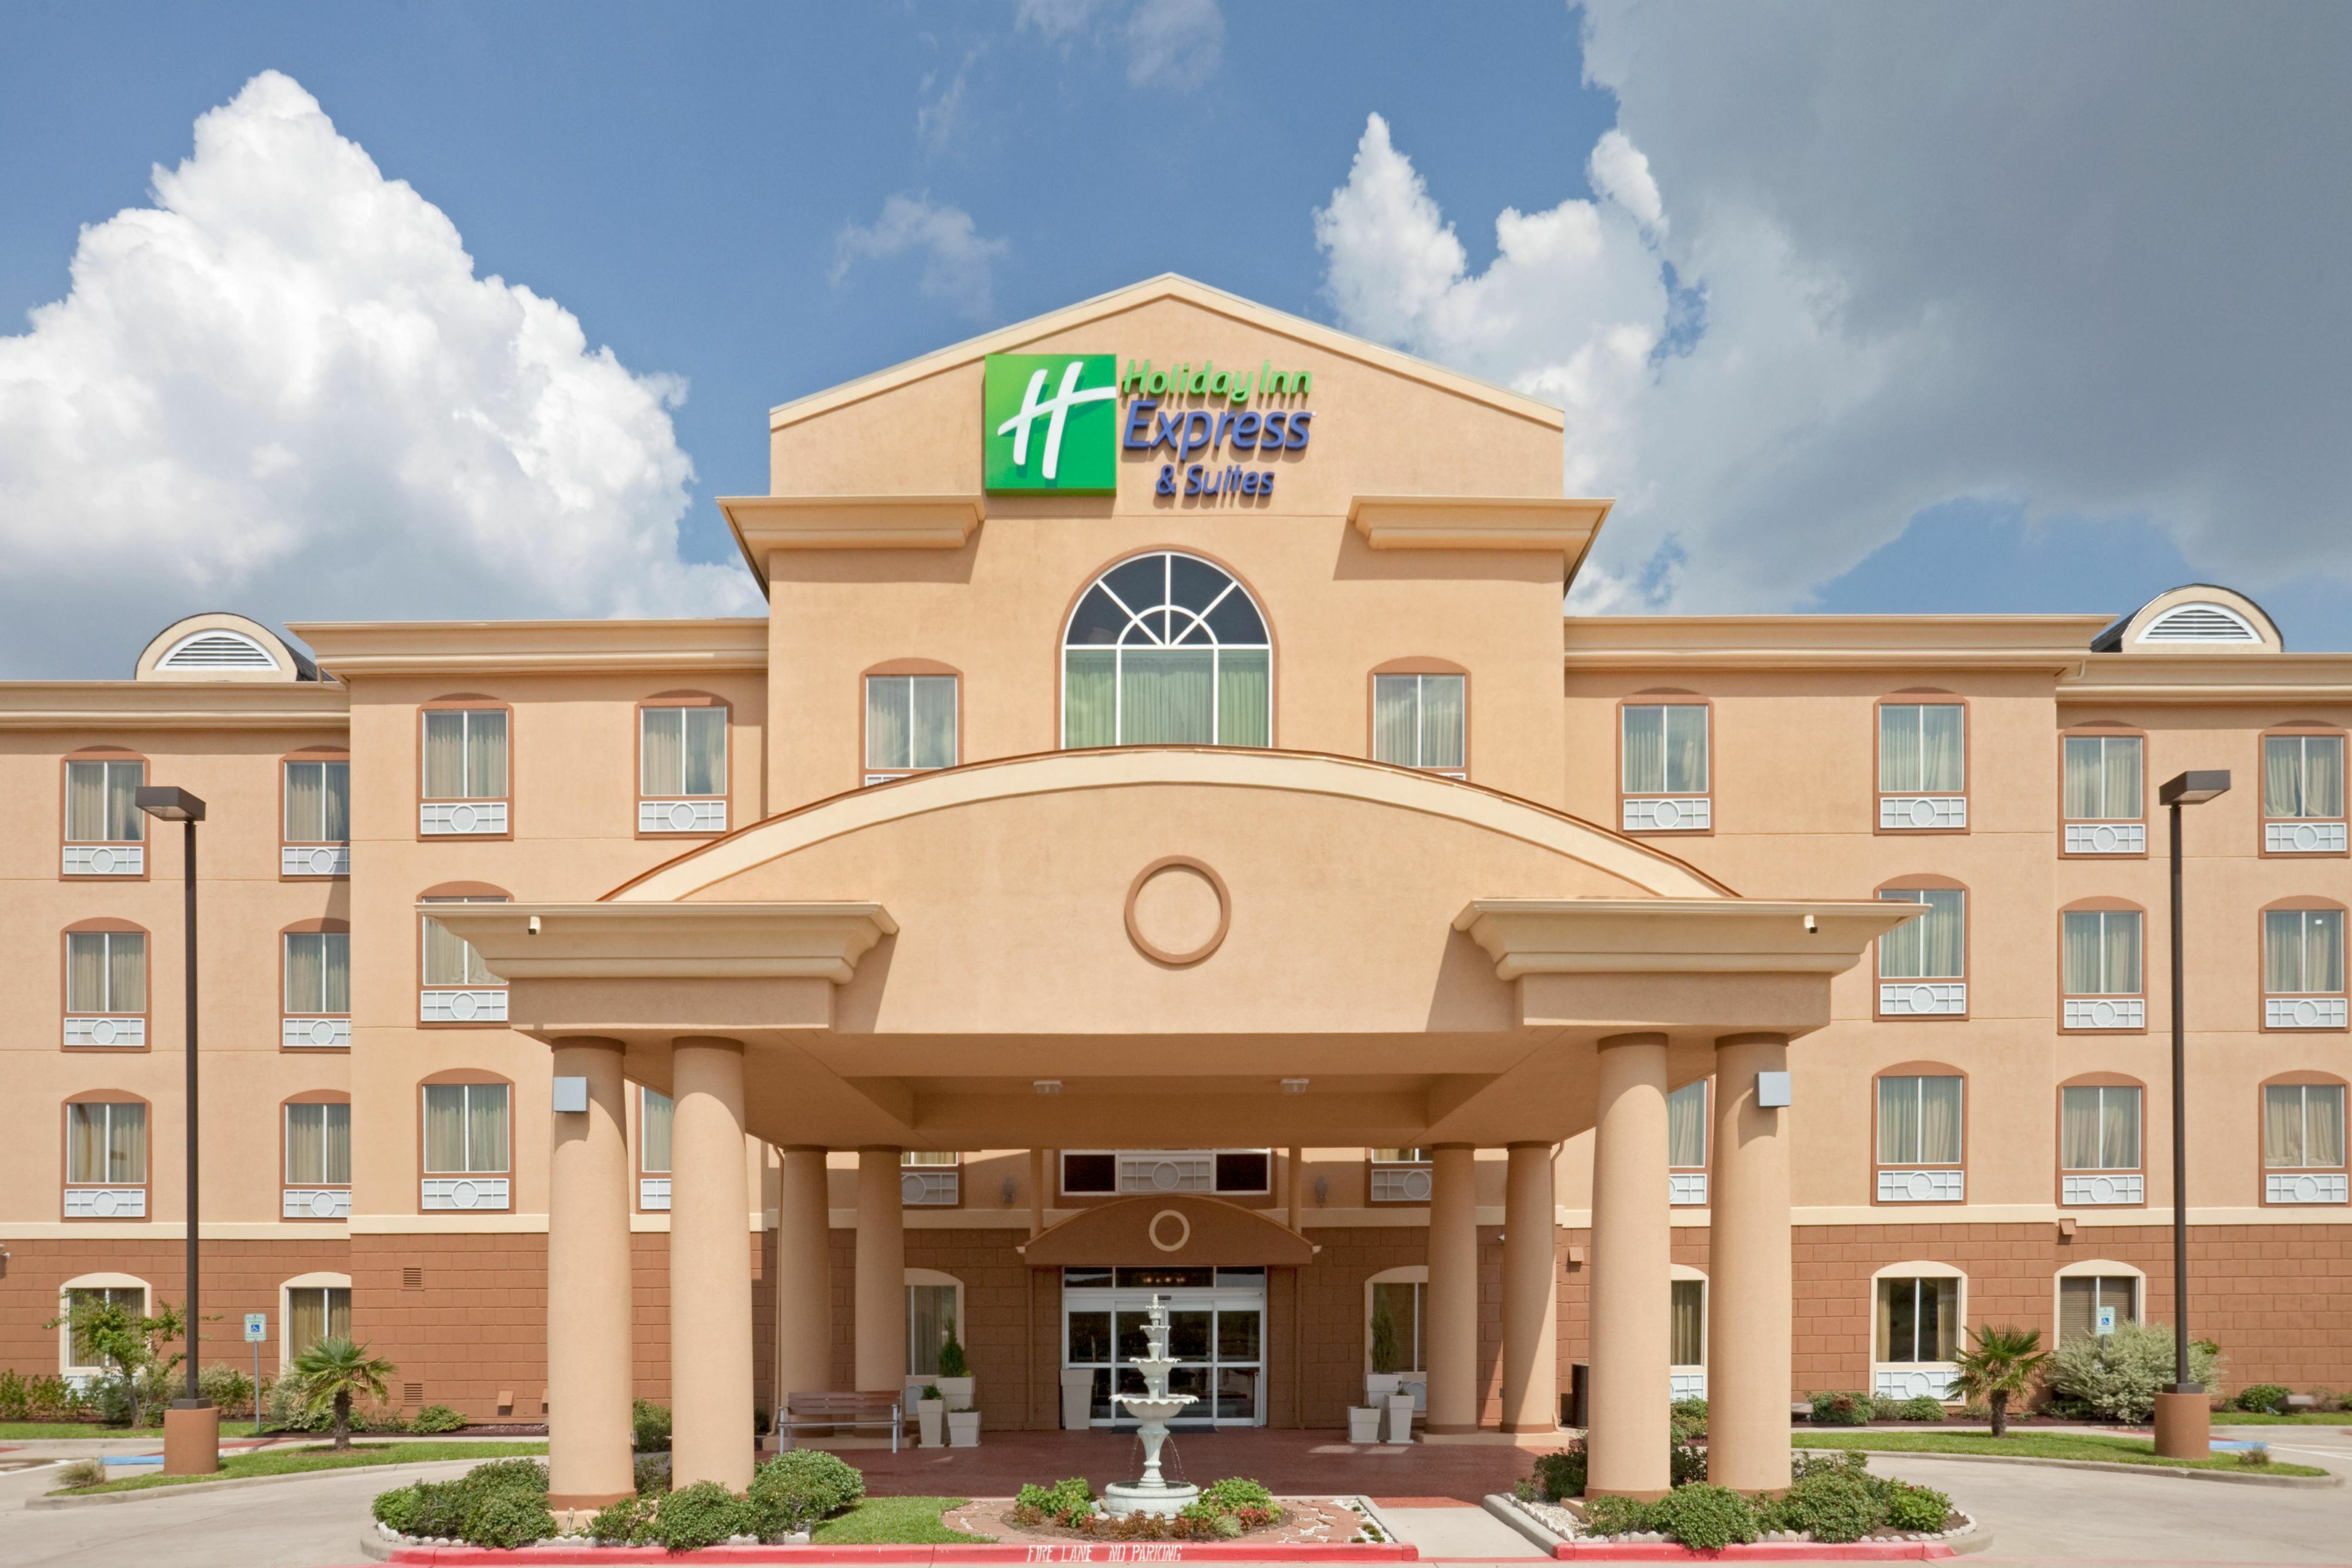 Photo of Holiday Inn Express & Suites Terrell, Terrell, TX